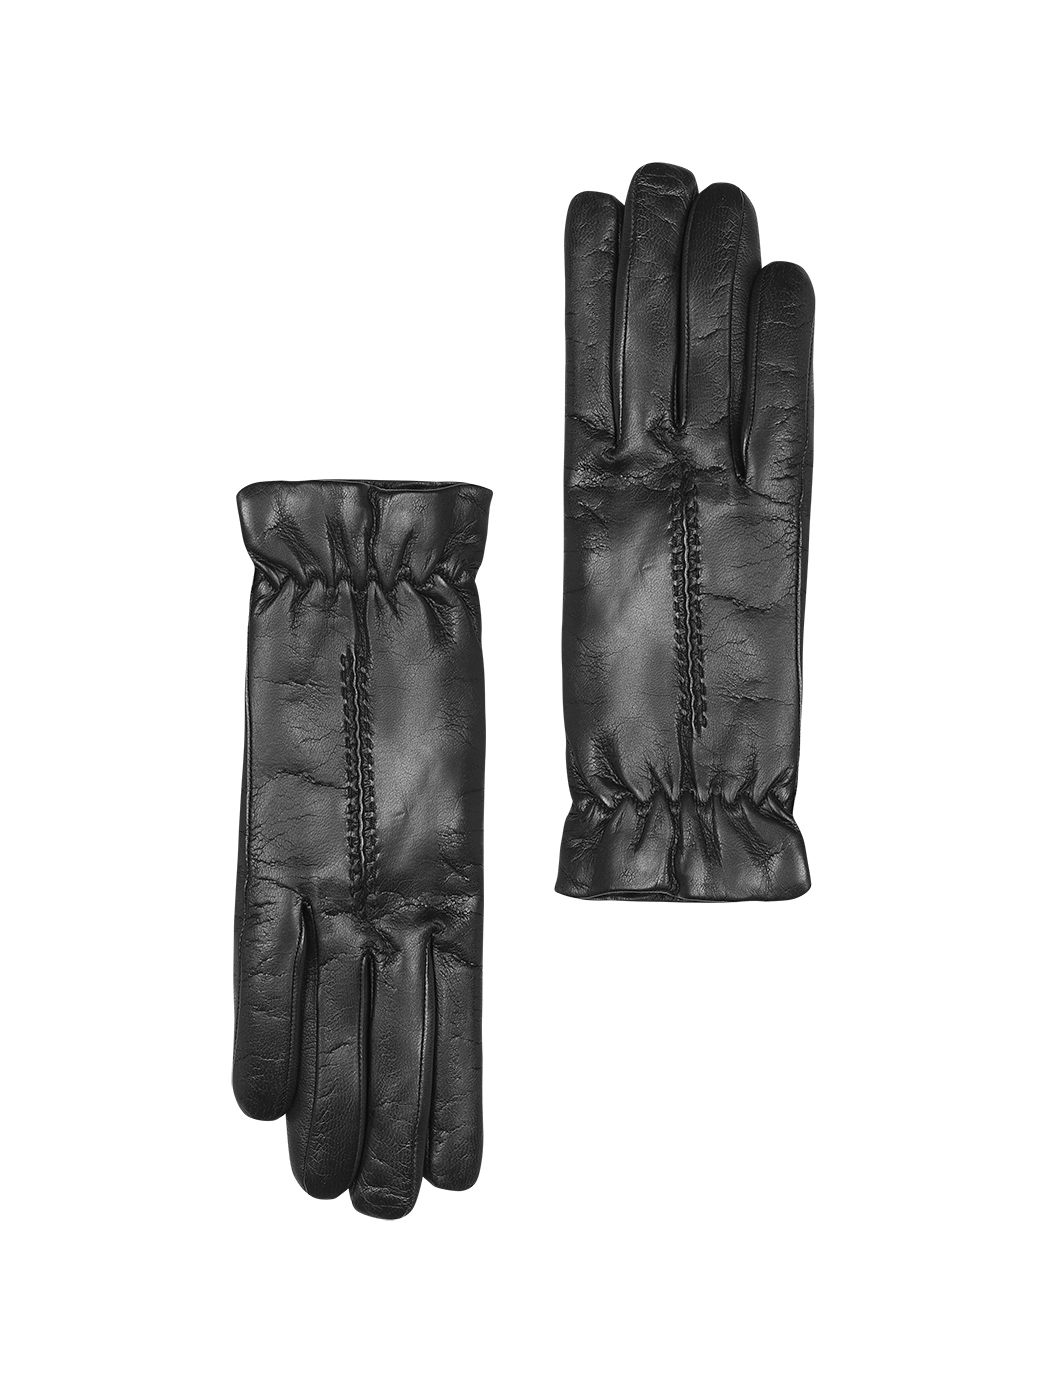 Women's Lambskin Gloves with Cashmere Lining Black